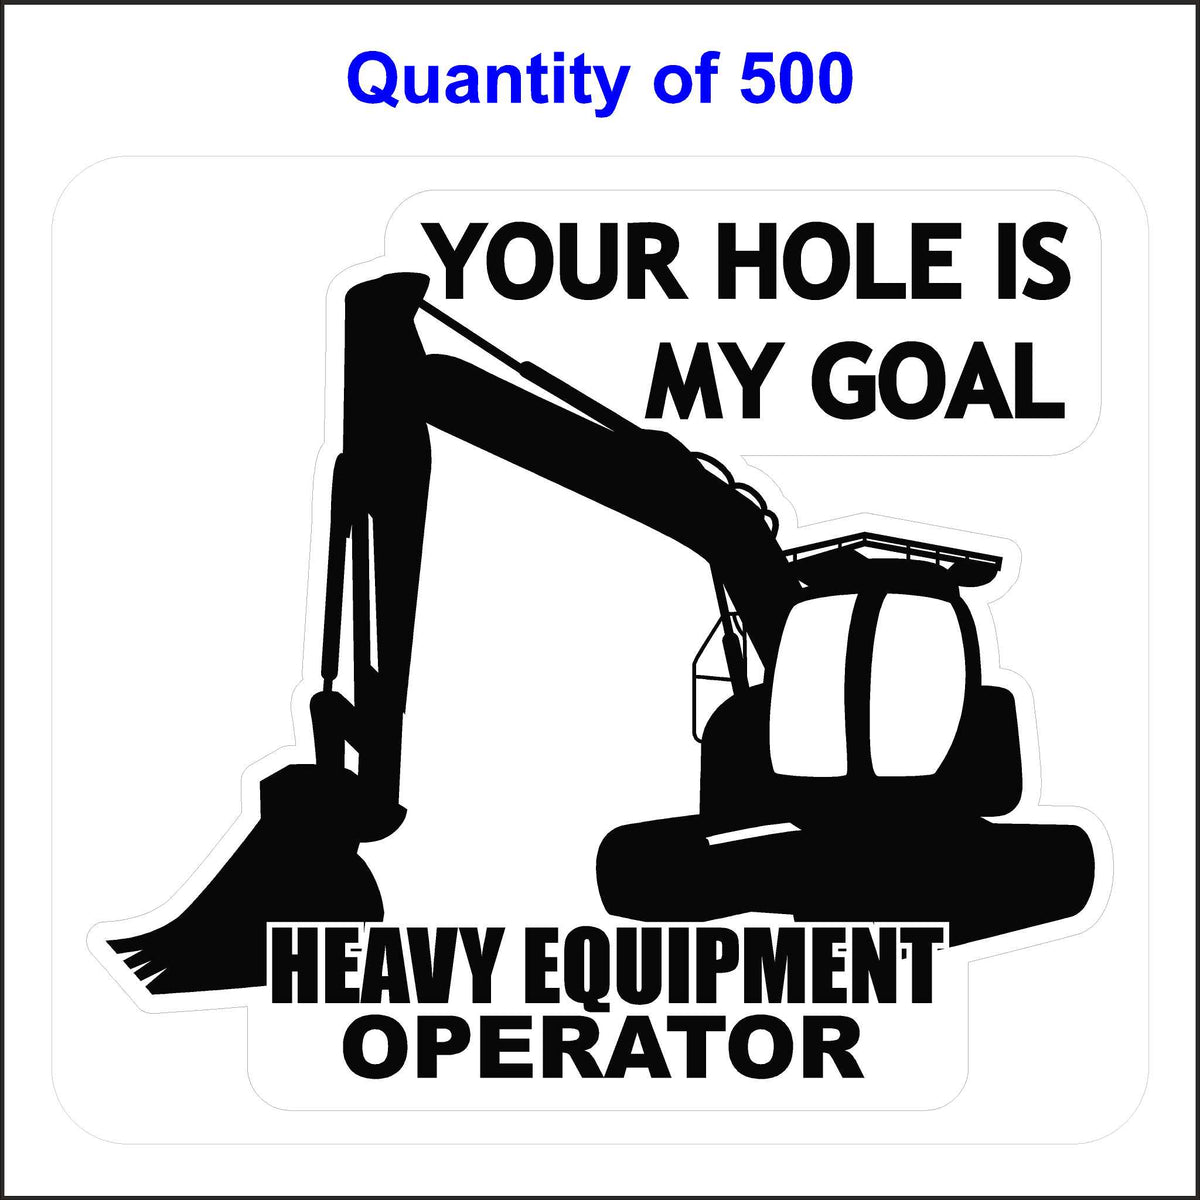 Heavy Equipment Operator Sticker. Your Hole Is My Goal Sticker. 500 Quantity.